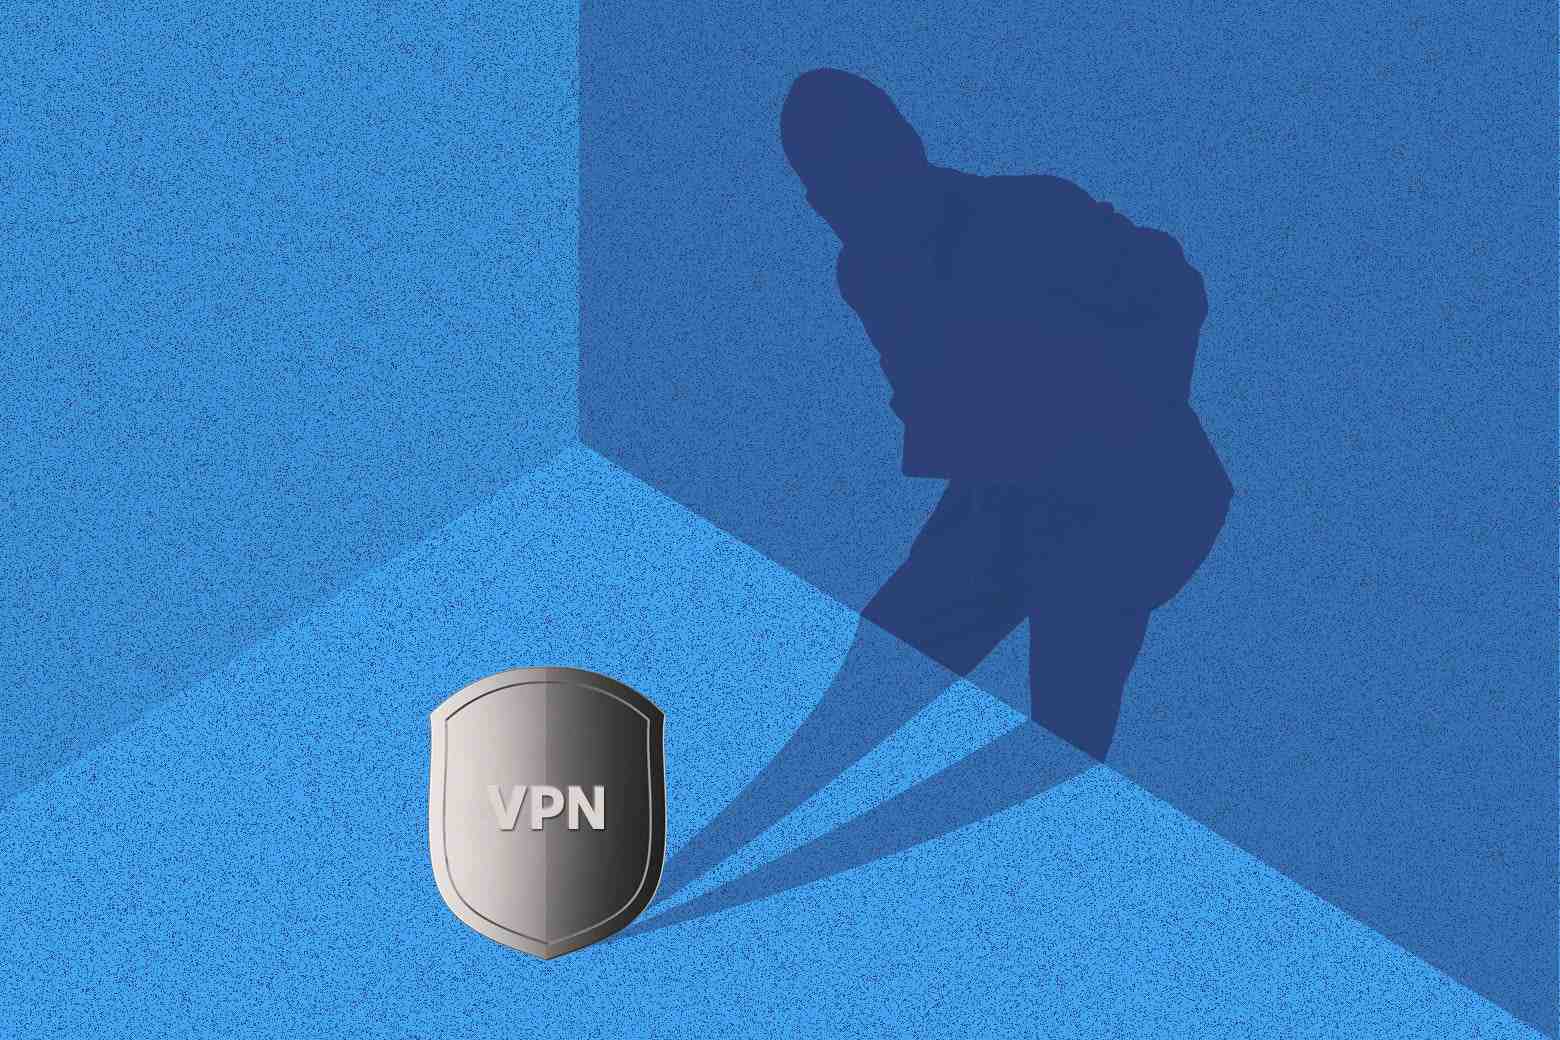 Can the police track a VPN?